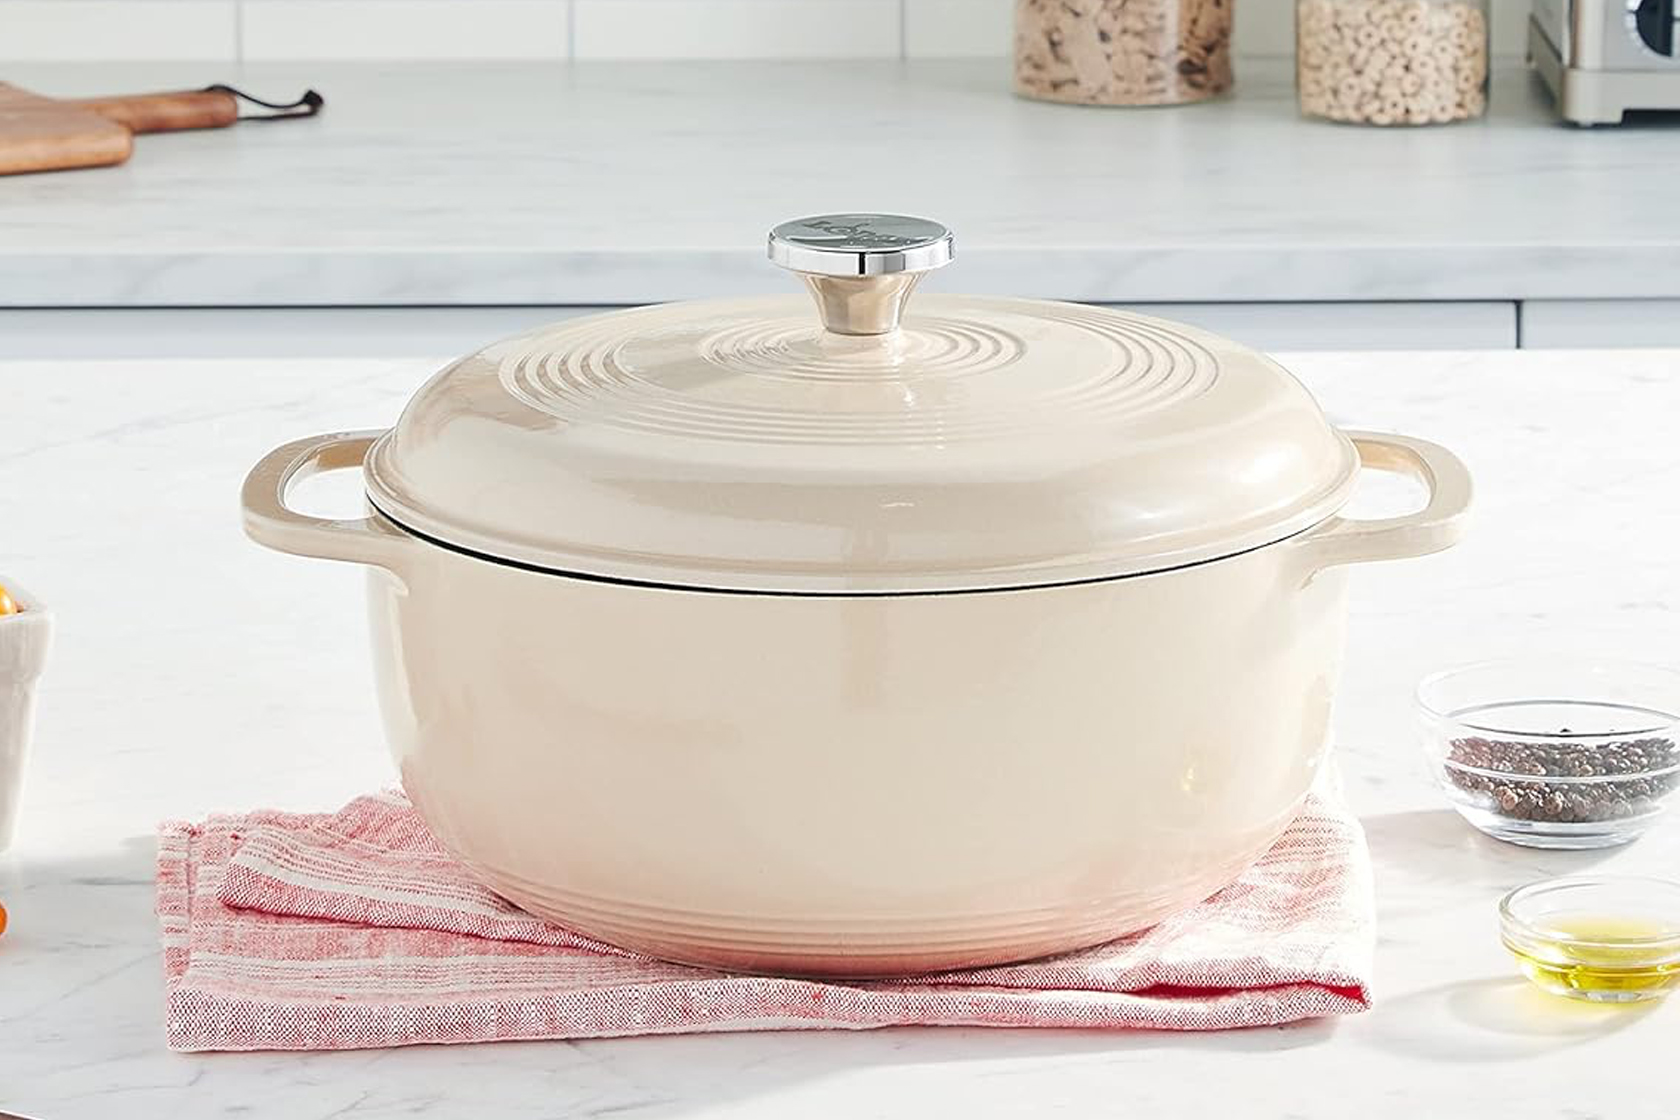 The Lodge Enameled Dutch Oven Is on Sale for $80 at